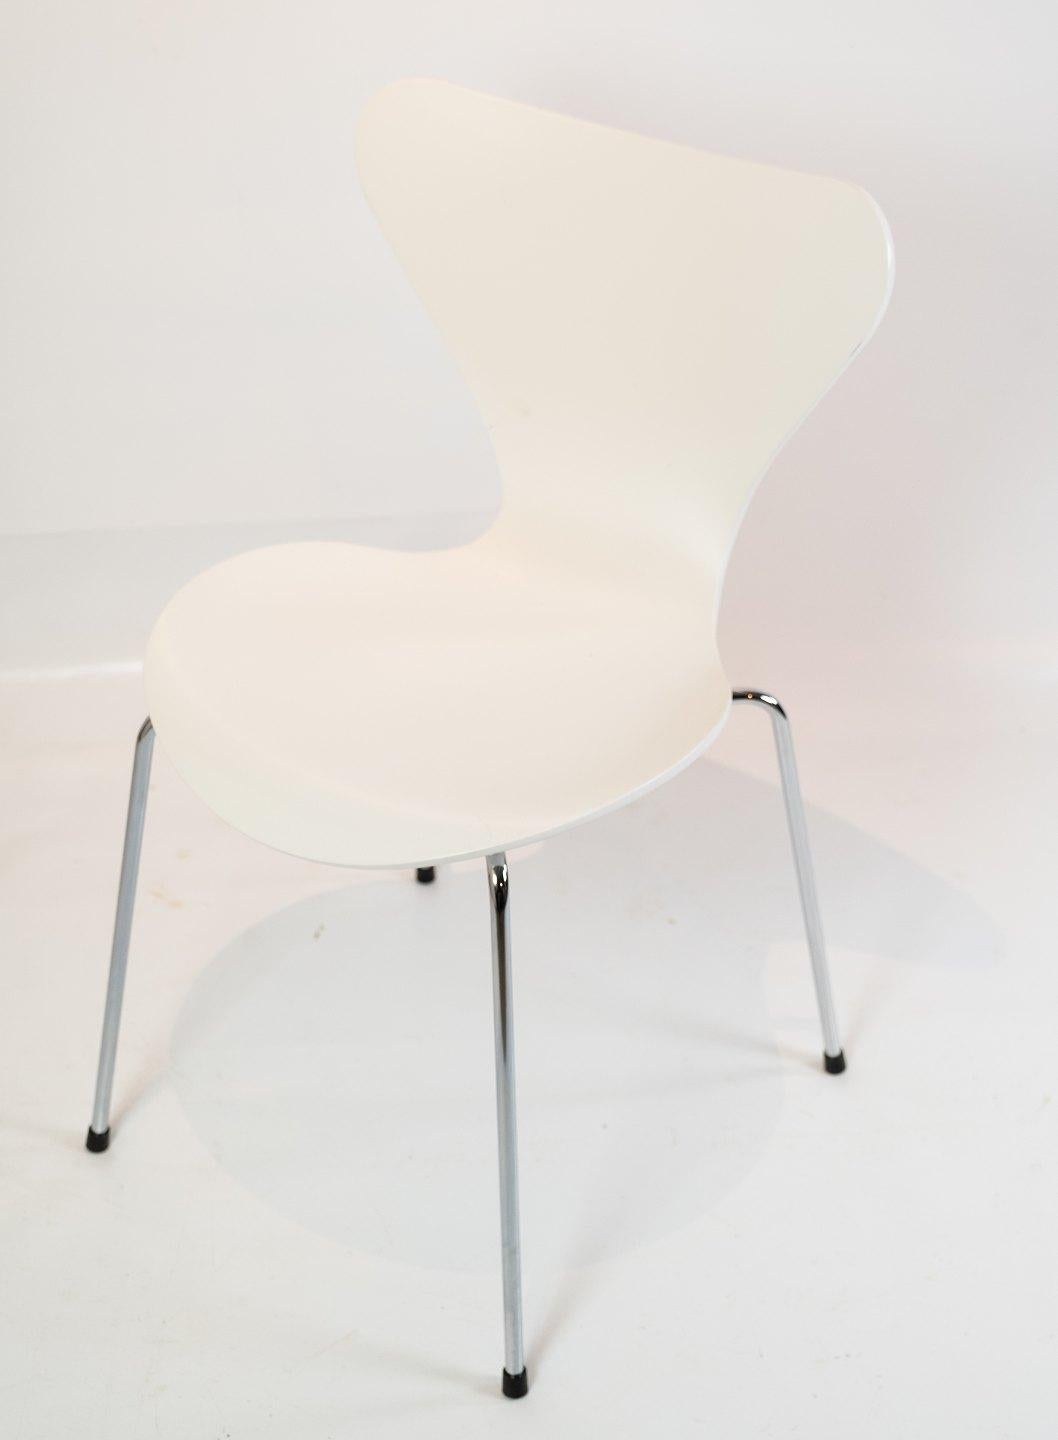 A set of 8 seven chairs, model 3107, designed by Arne Jacobsen and manufactured by Fritz Hansen in 2020. The chairs are lacquered white and in great used condition.
   